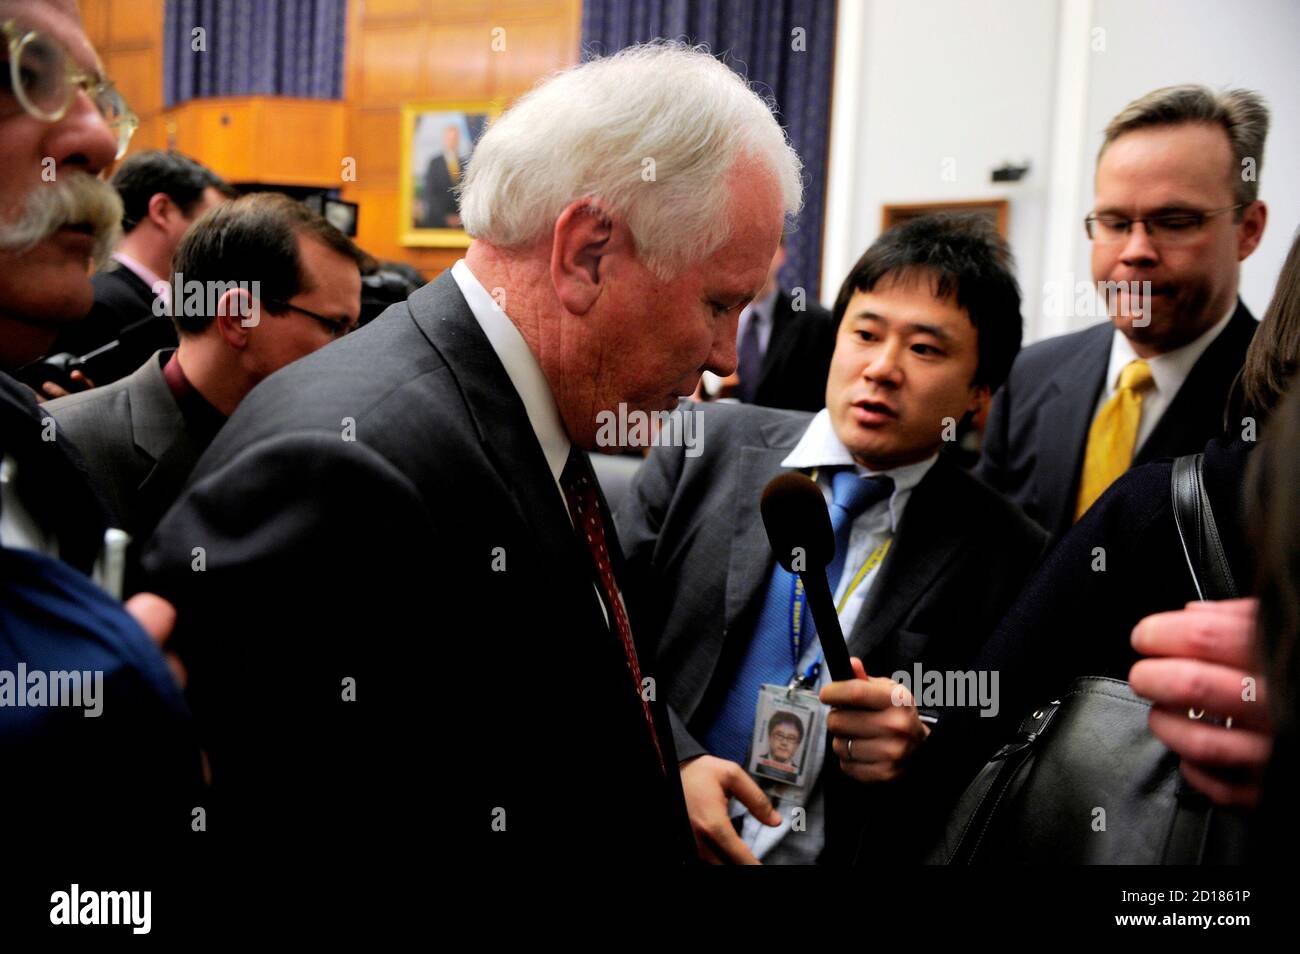 AIG CEO Edward Liddy makes his way through journalists as he departs after testifying before the House Financial Services Subcommittee on Capital Markets, Insurance, and Government Sponsored Enterprises on Capitol Hill in Washington March 18, 2009. The hearing was on 'American International Group's Impact on the Global Economy: Before, During, and After Federal Intervention'. The U.S. House of Representatives, reacting to public furor, will vote on Thursday on a bill to recoup most of the bonuses paid to AIG executives after the insurer got billions of dollars in government aid, Democratic lea Stock Photo